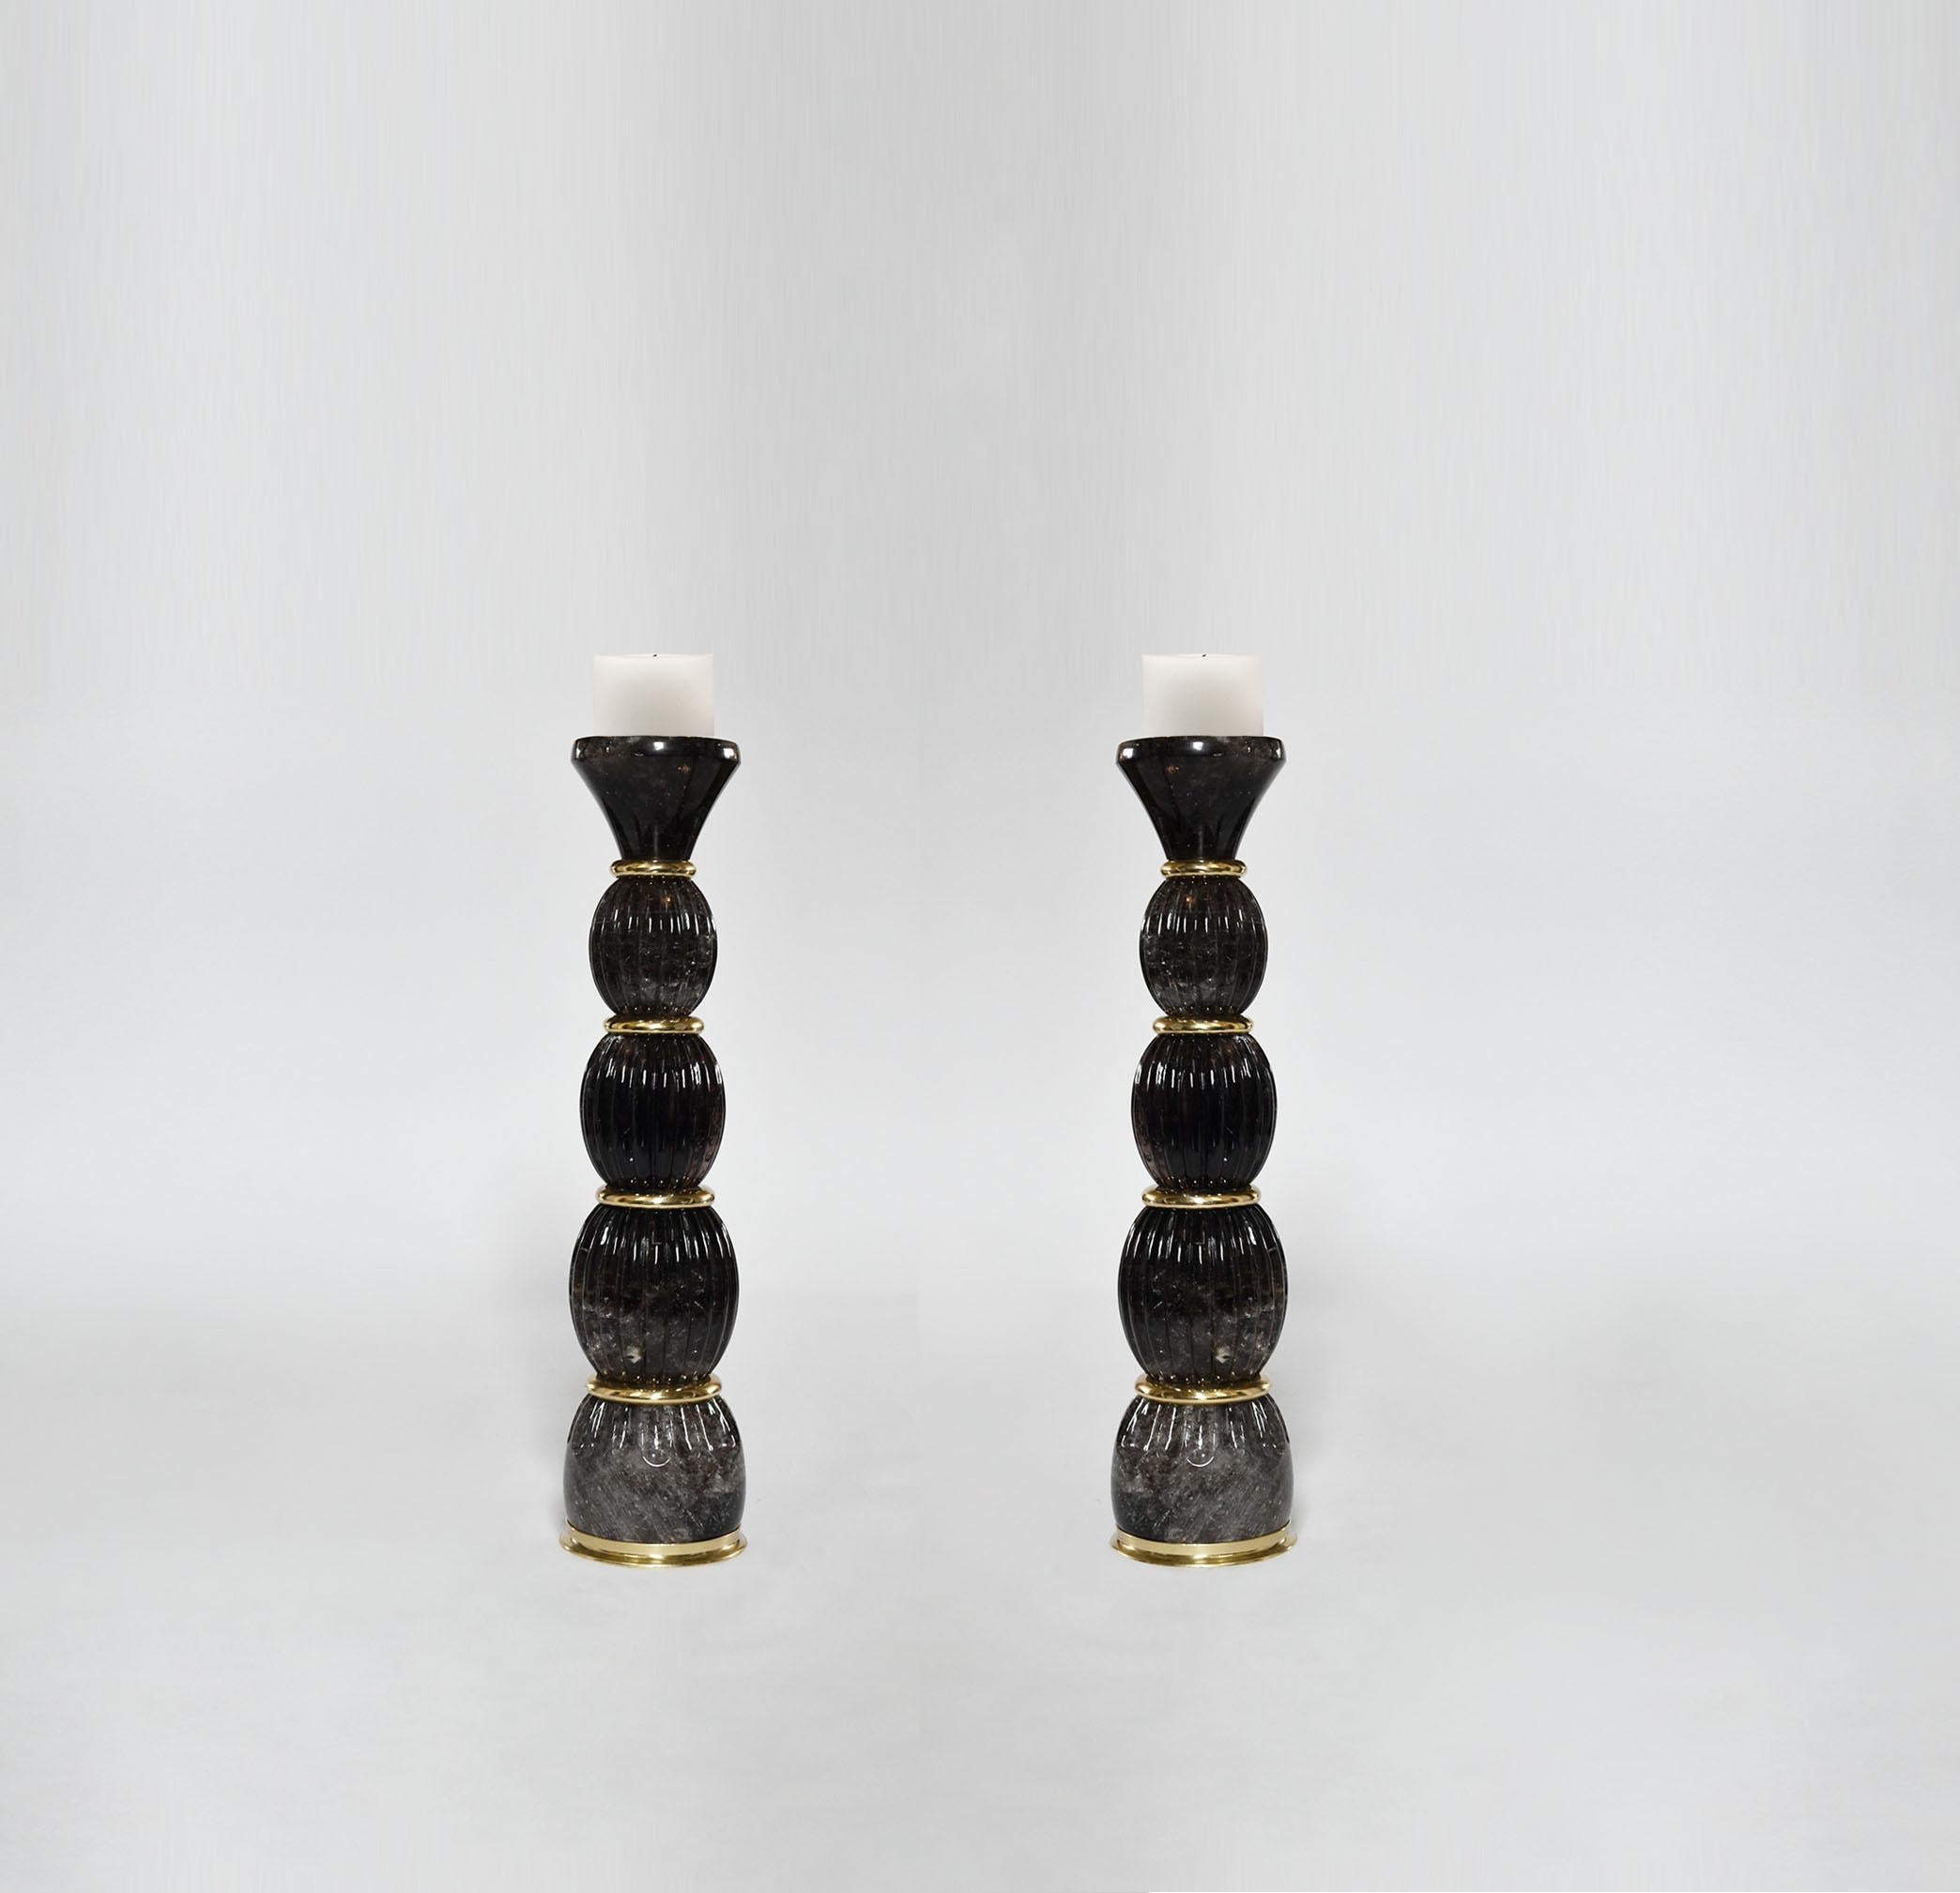 Pair of fine carved smoky rock crystal candleholders with polish brass insert decoration. Created by Pheonix Gallery, NYC.
Custom size and quantity upon request.